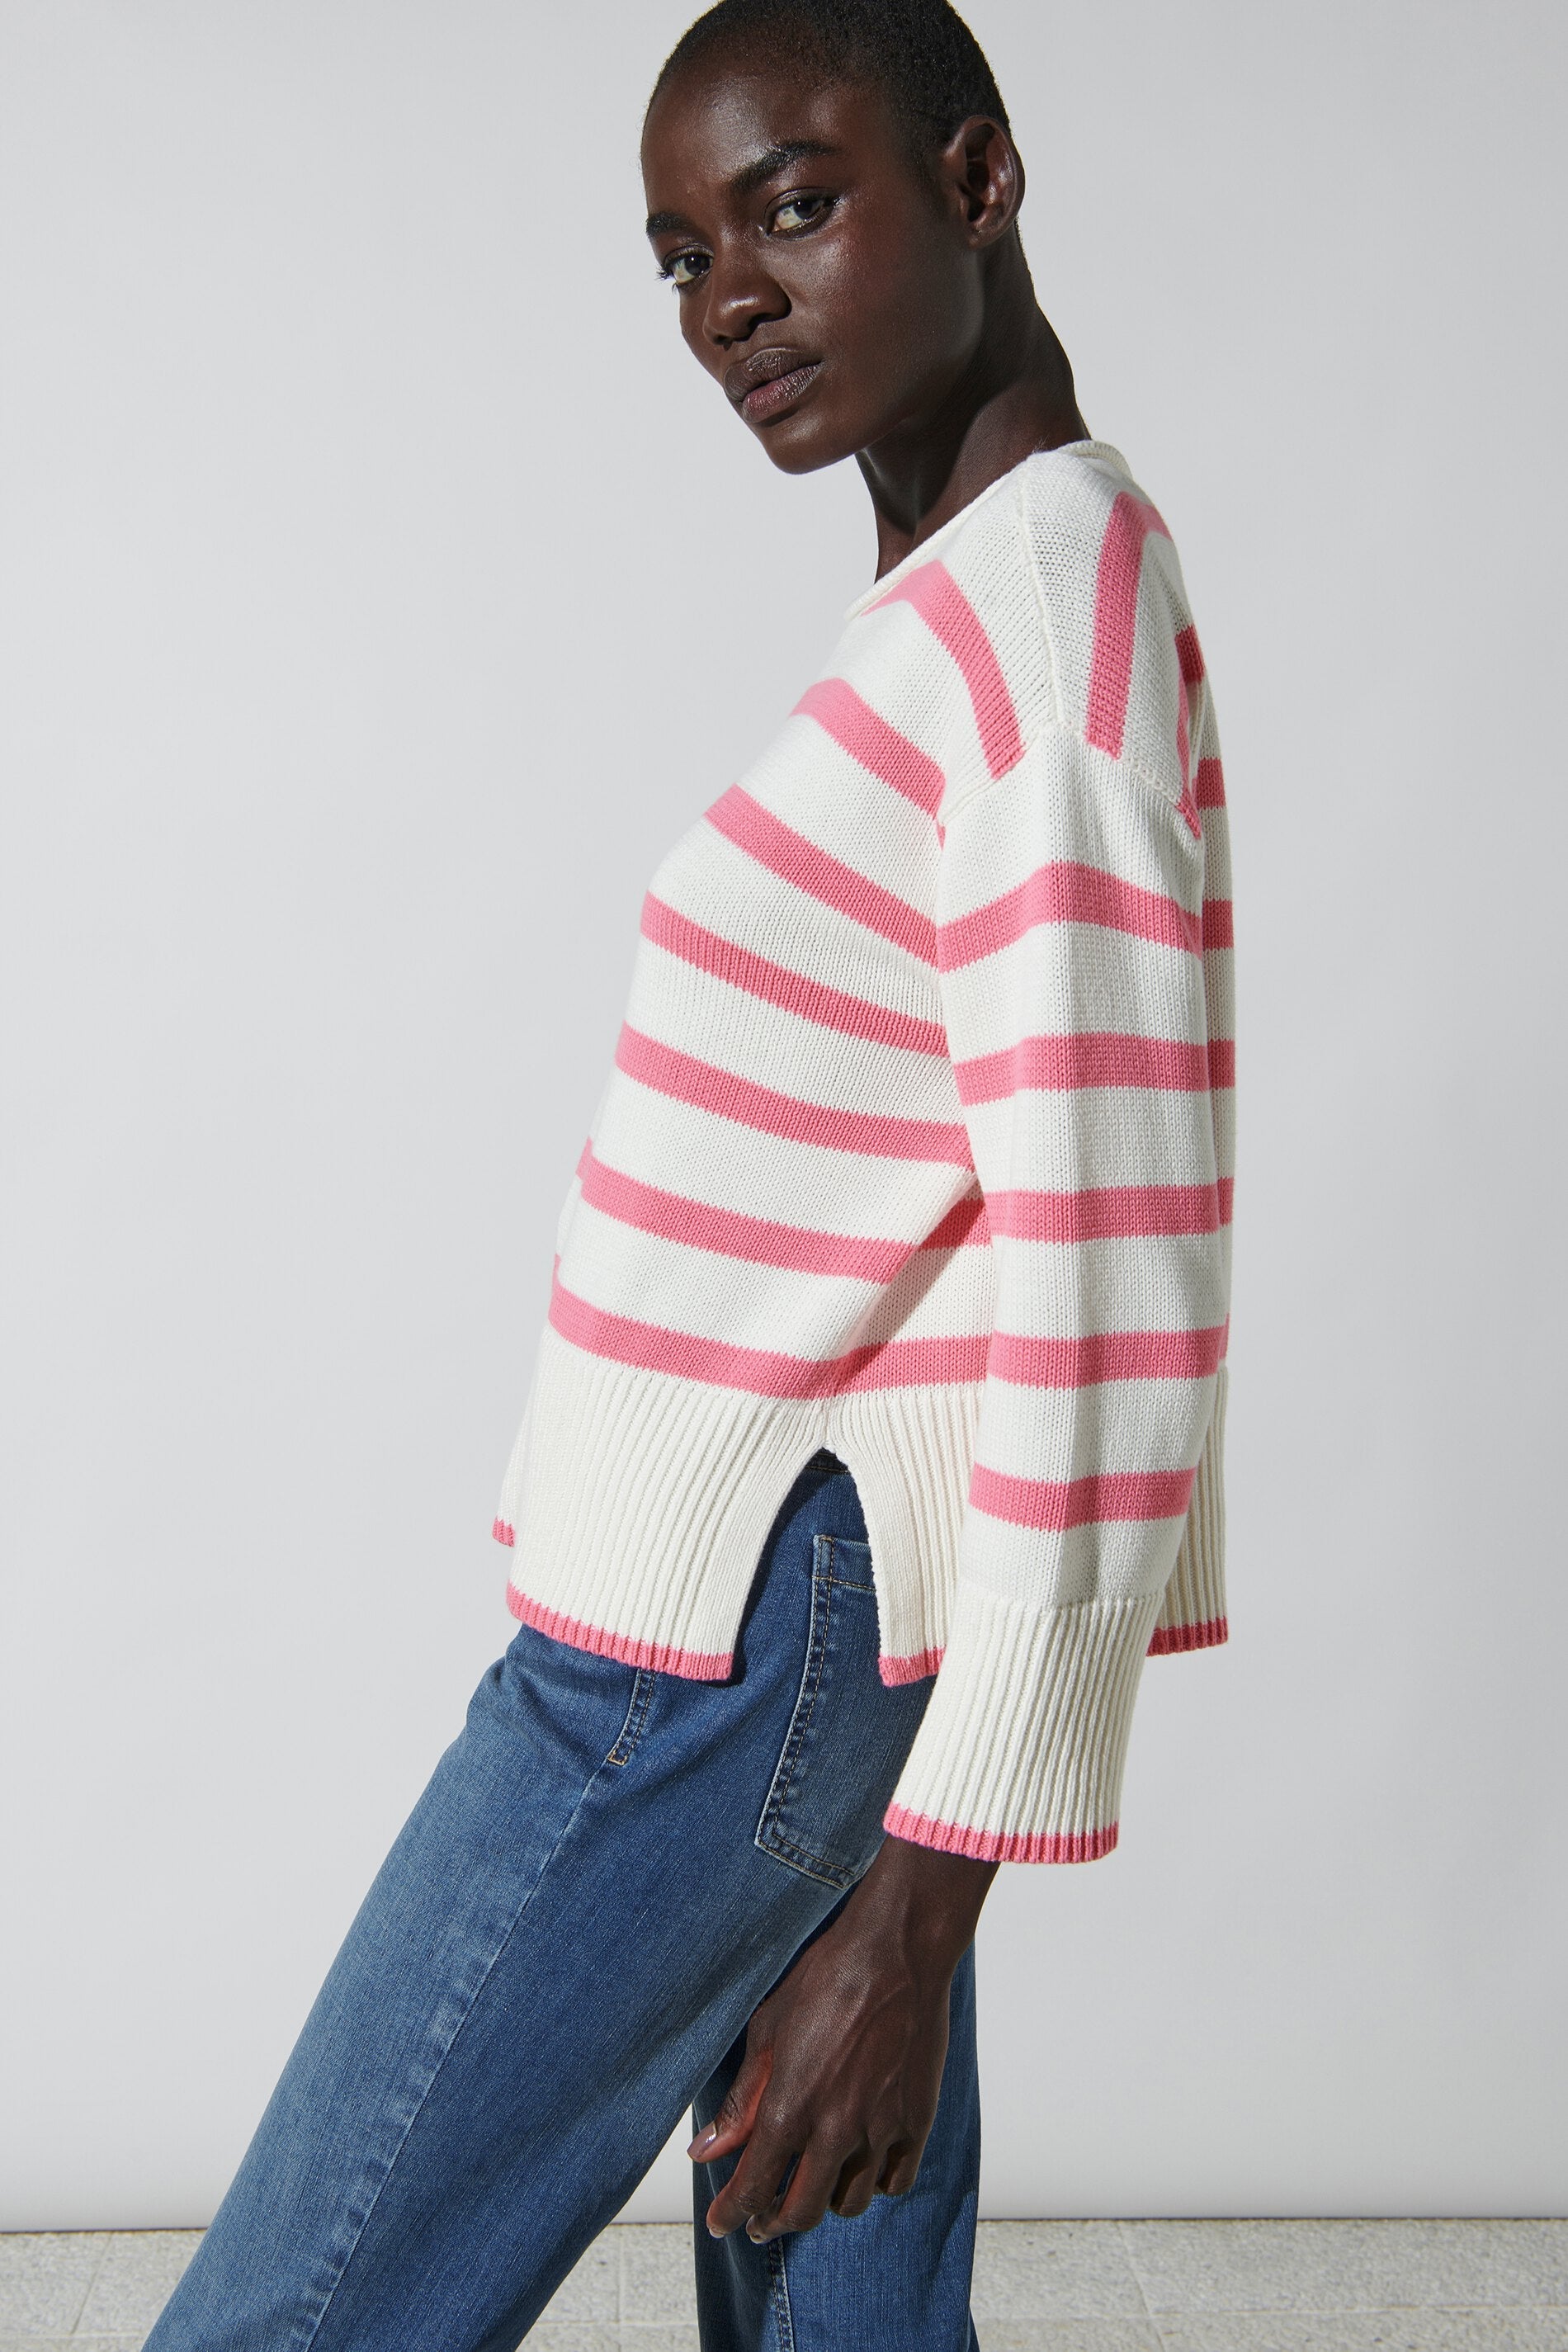 Pullover-mit-Bold-Stripes-LUISA-CERANO-OUTLET-SALE-3_e821027a-5cb7-4d68-8309-52d5866ae496.jpg